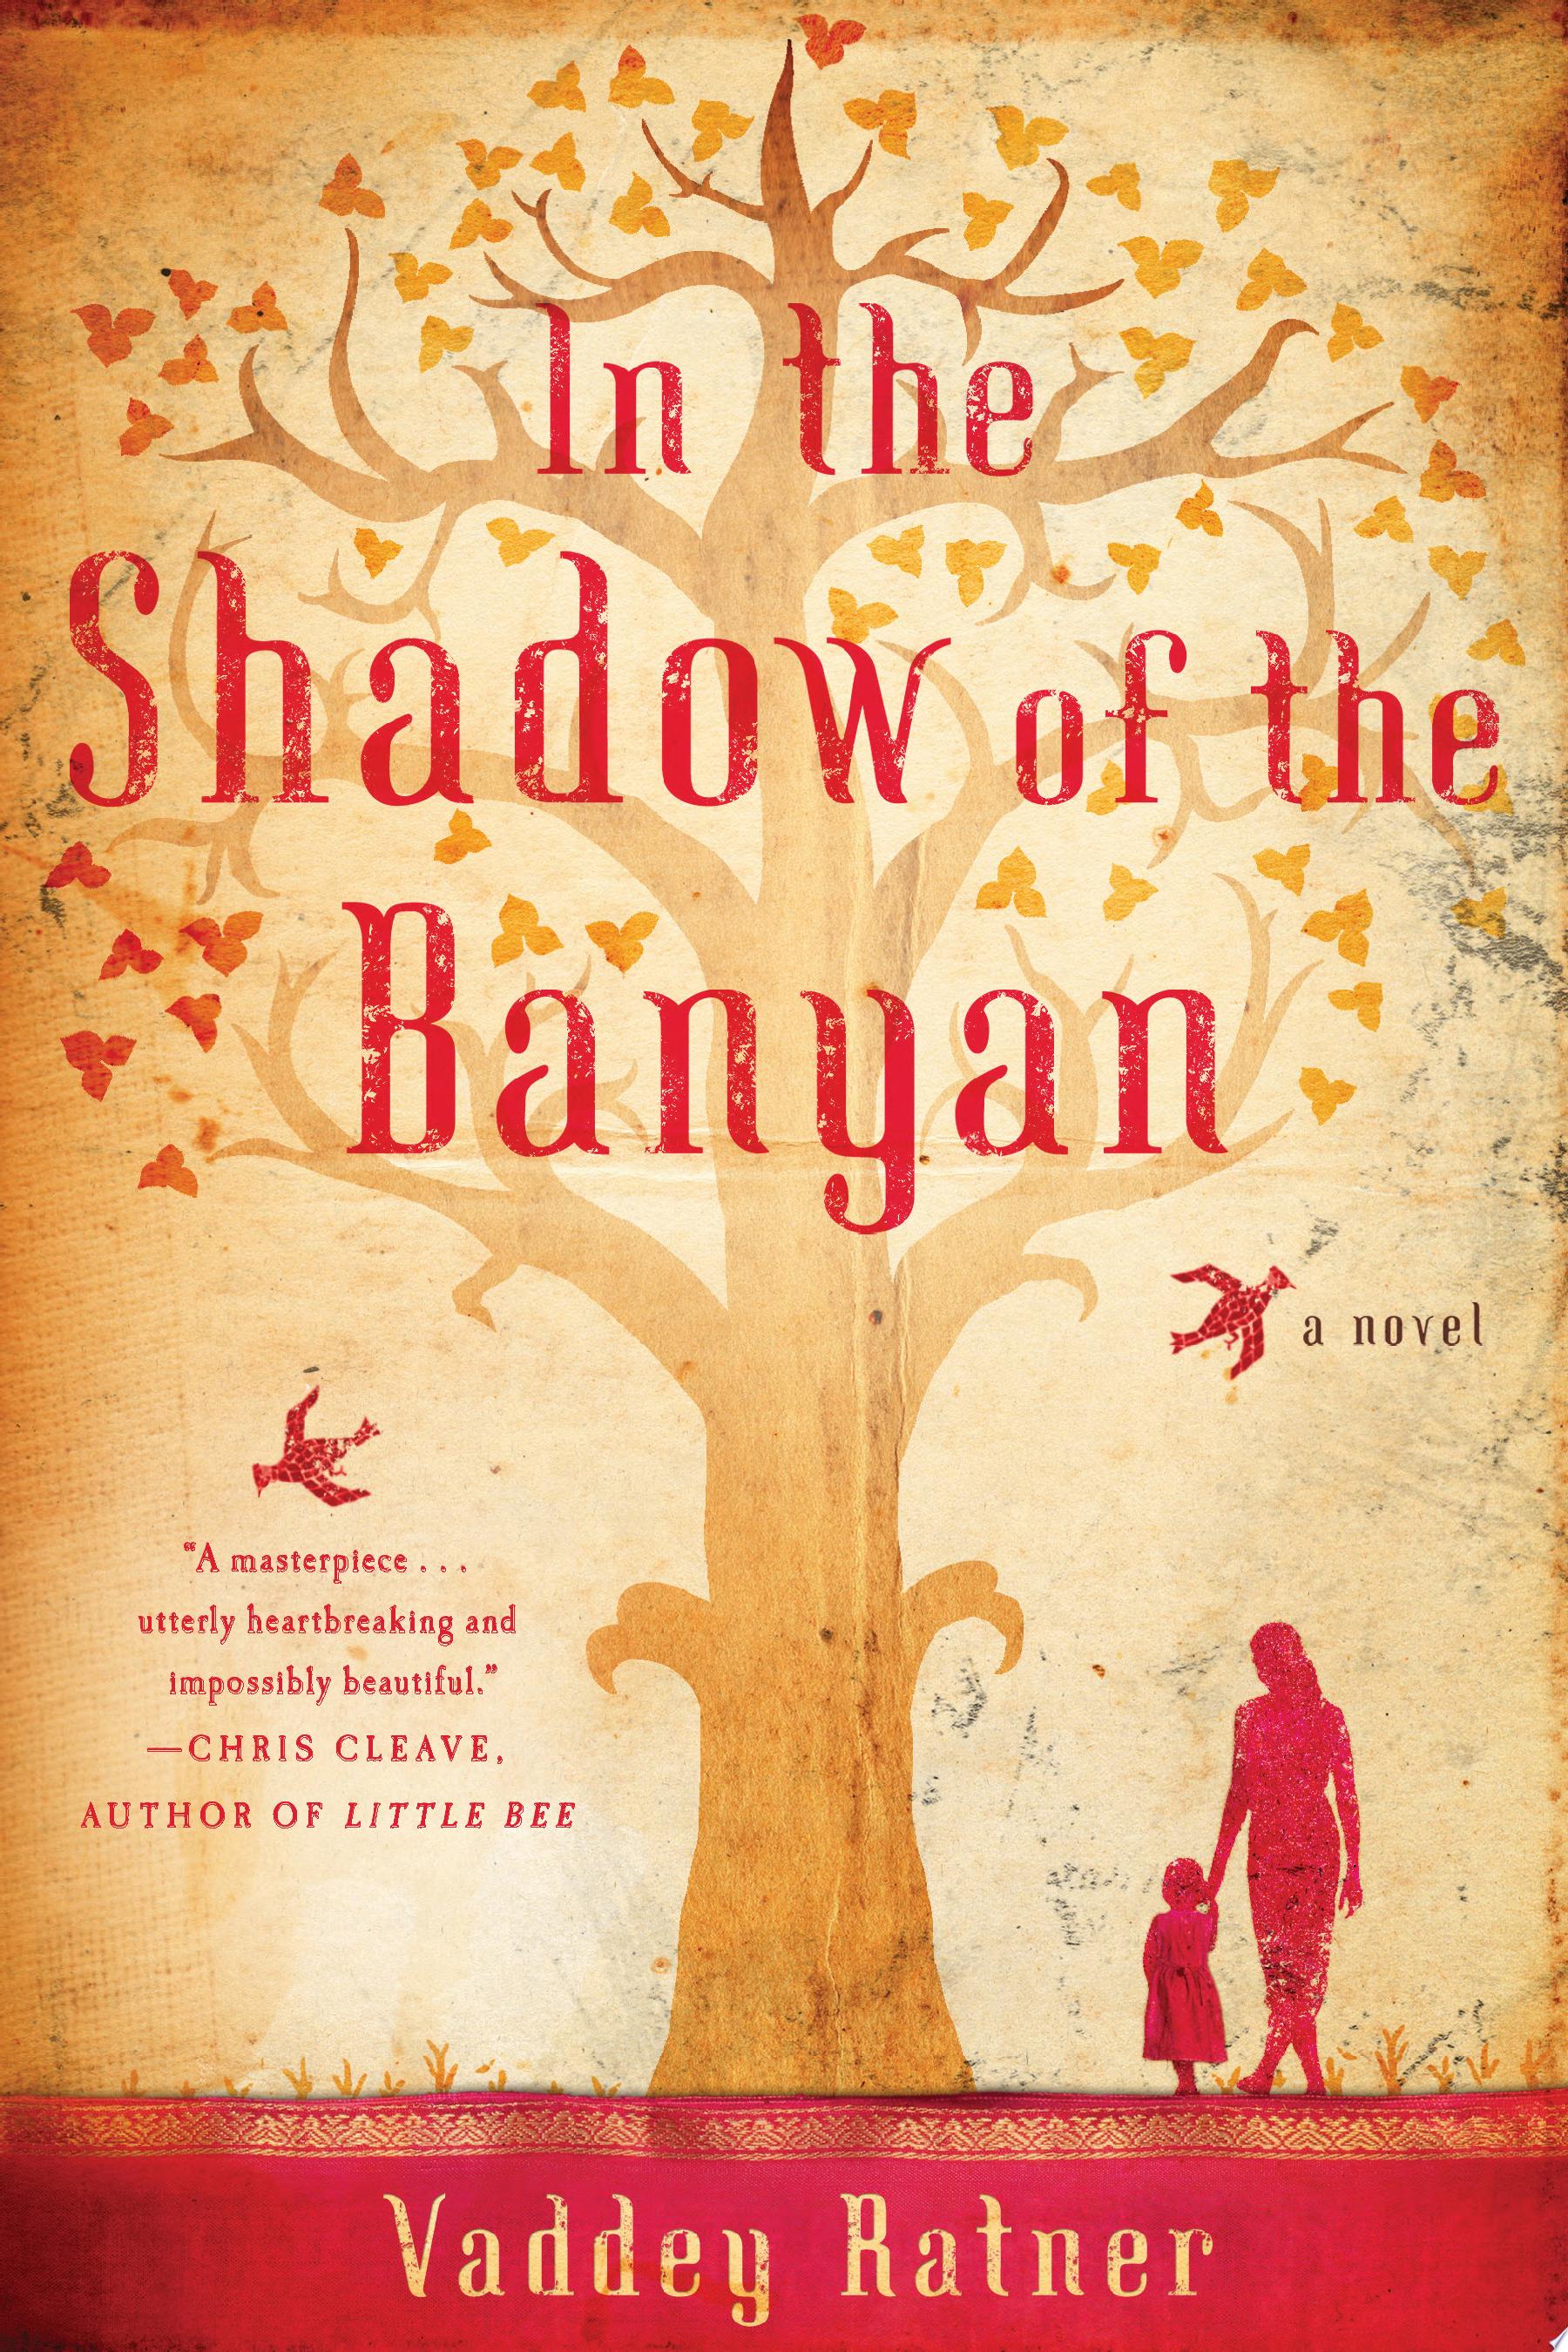 Image for "In the Shadow of the Banyan"